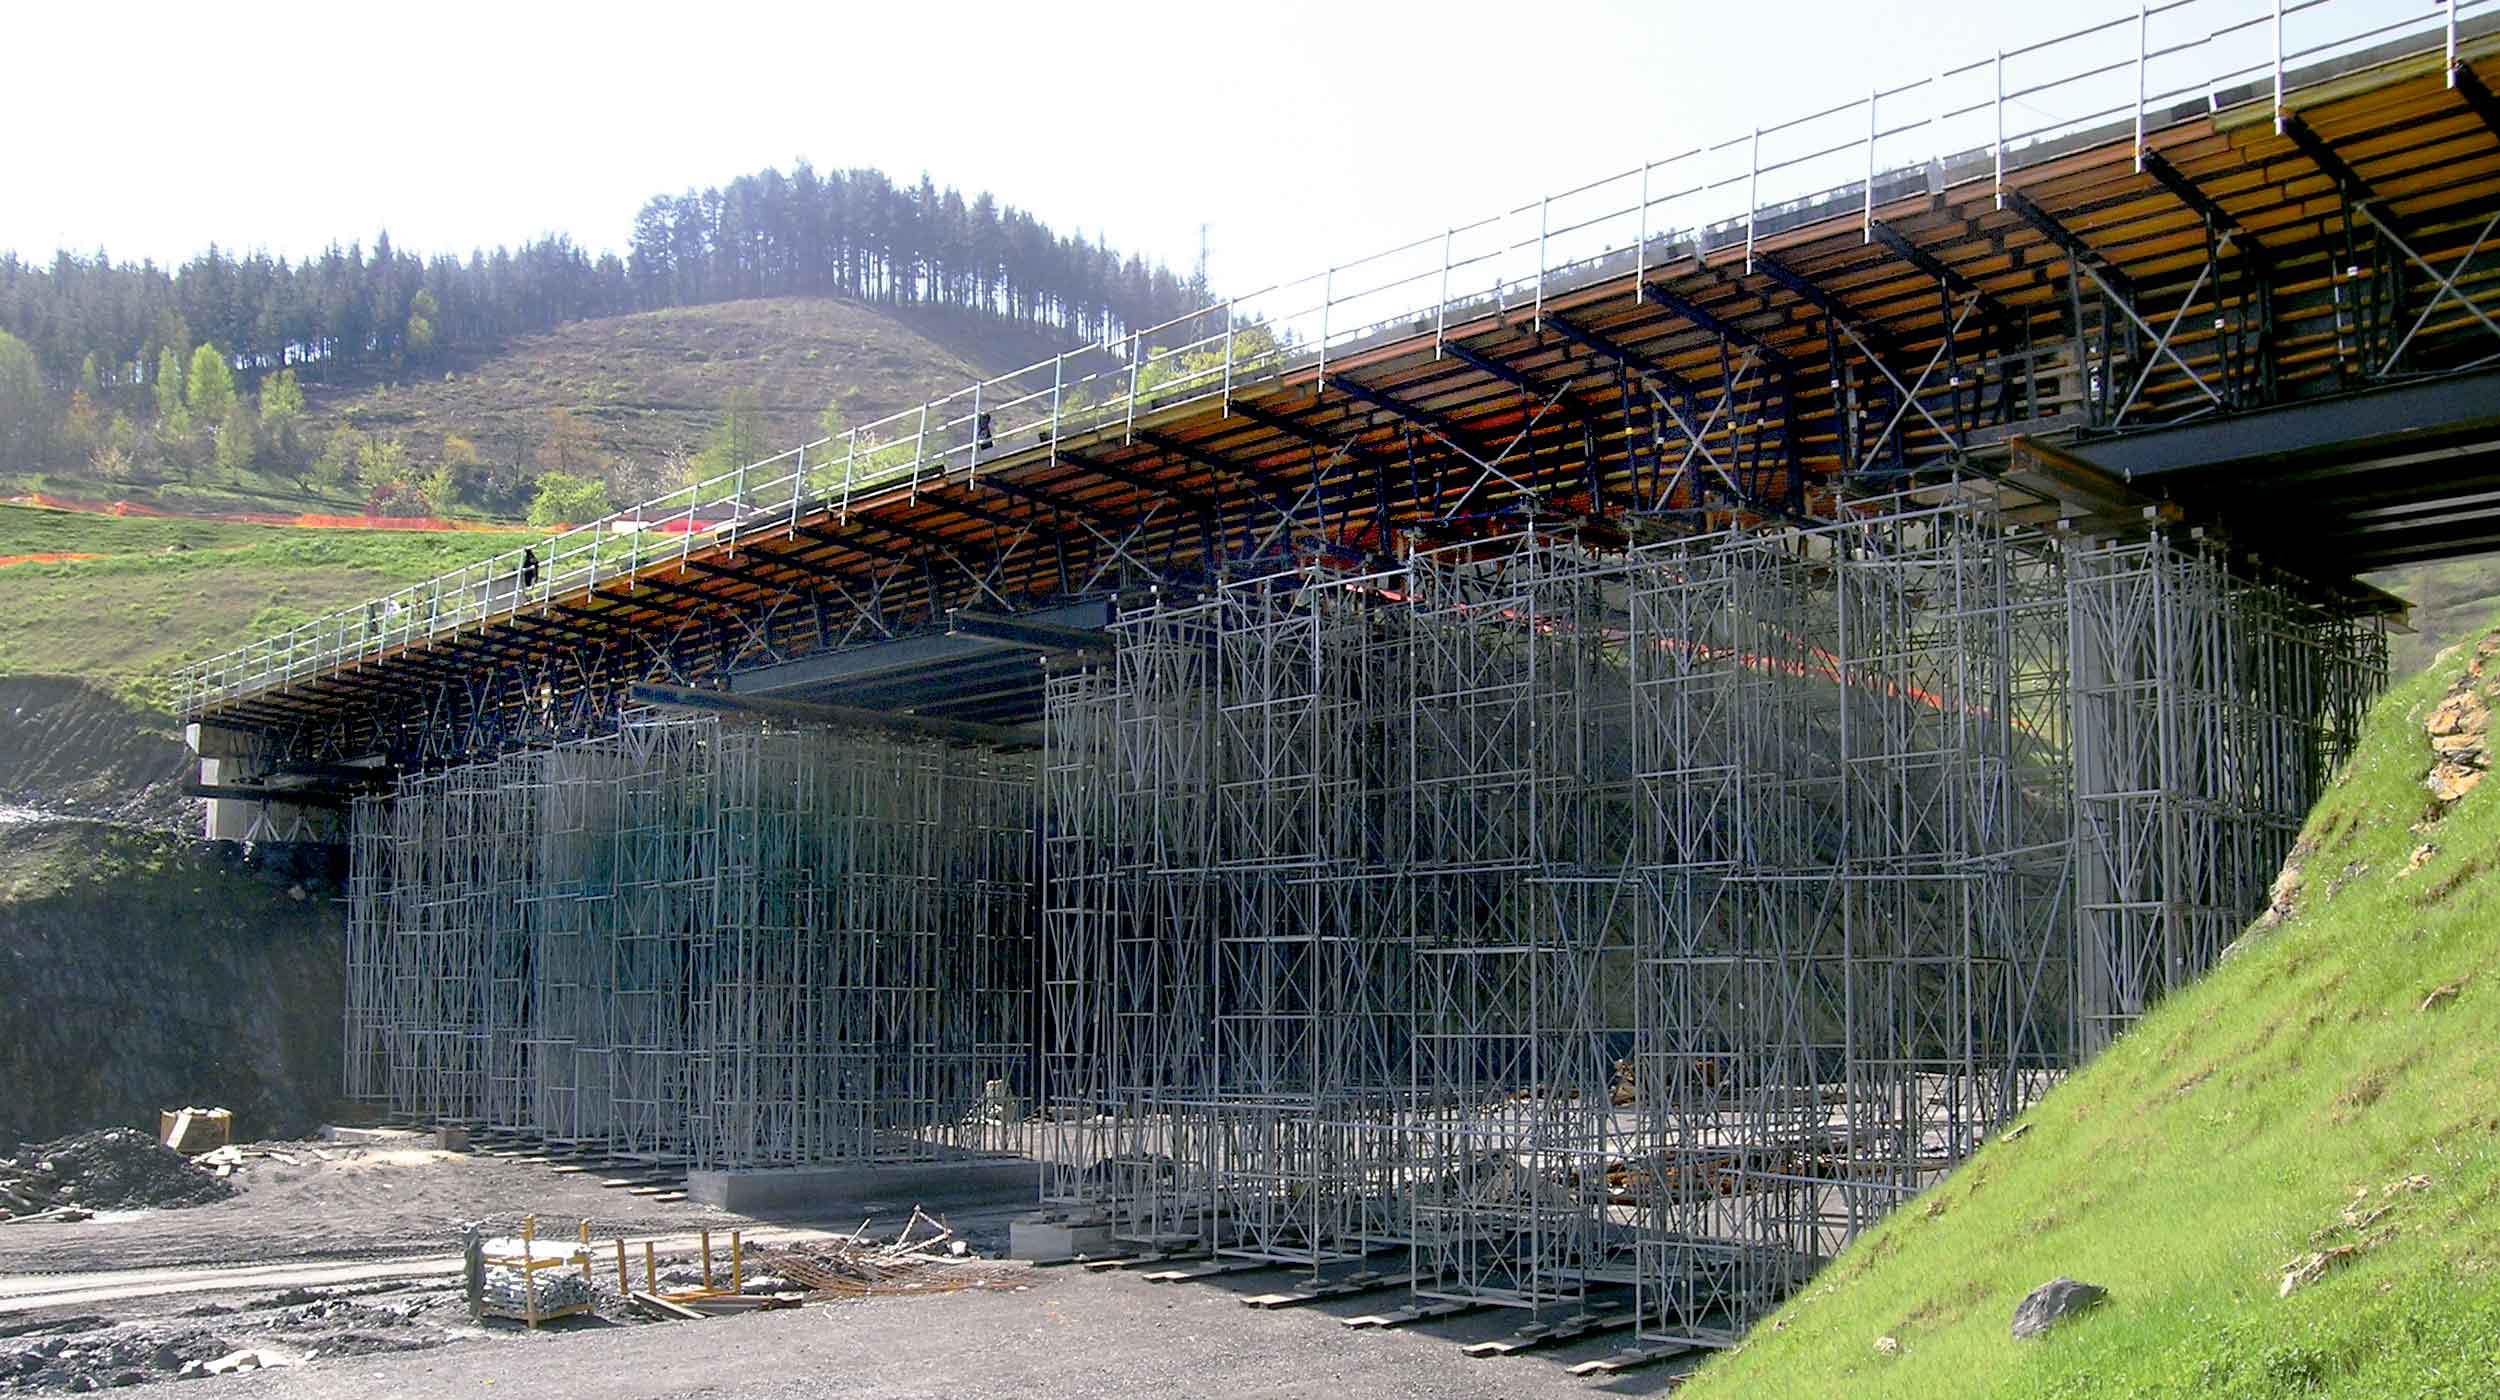 ULMA Construction has contributed to the infrastructure improvement in the Basque Country through the construction of the Eskoriatza - Arrasate.